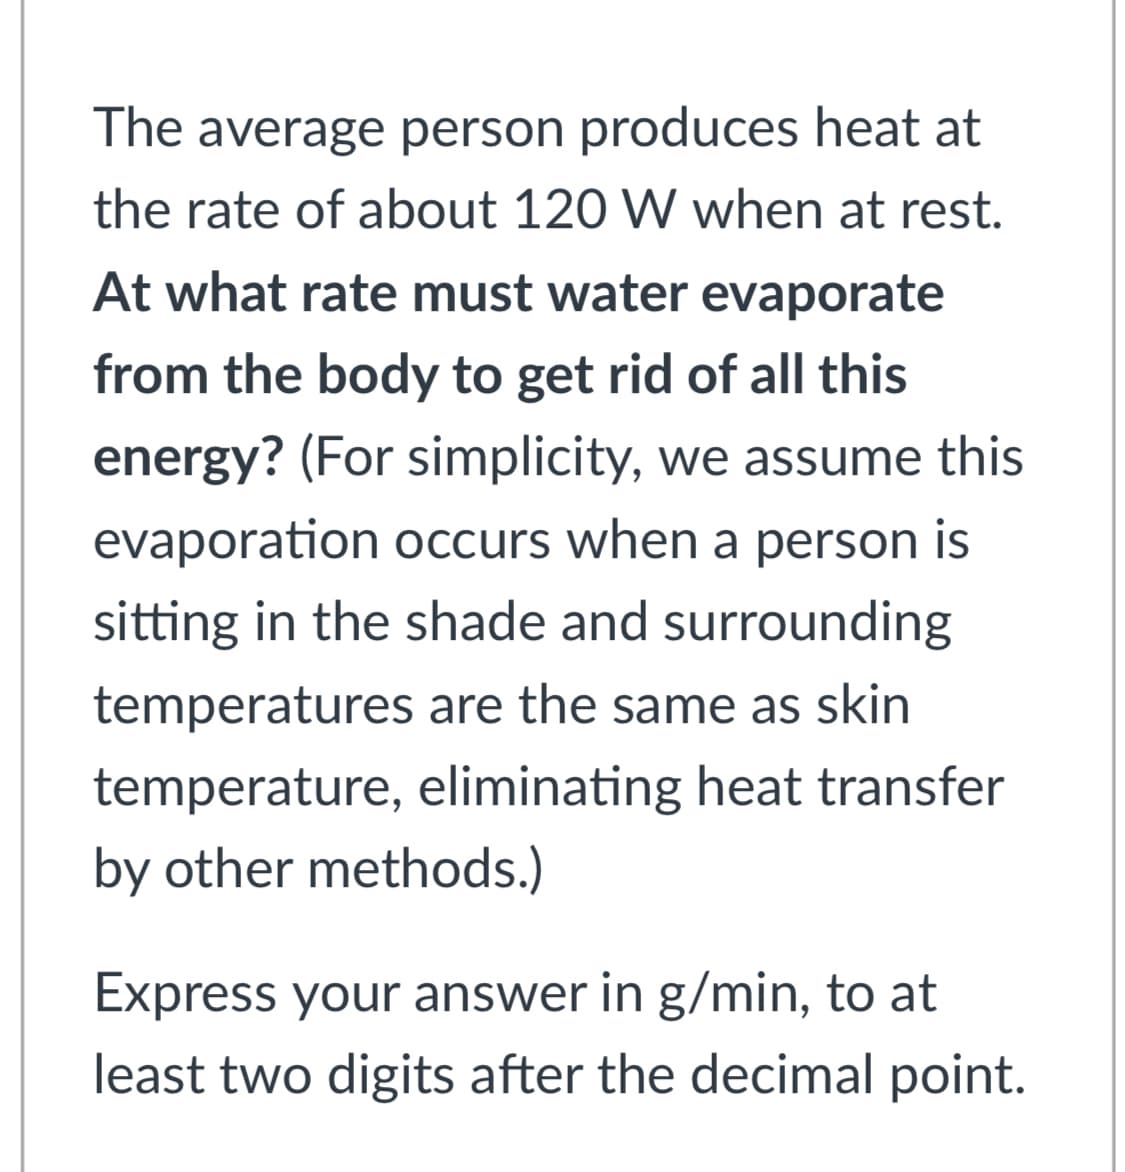 The average person produces heat at
the rate of about 120 W when at rest.
At what rate must water evaporate
from the body to get rid of all this
energy? (For simplicity, we assume this
evaporation occurs when a person is
sitting in the shade and surrounding
temperatures are the same as skin
temperature, eliminating heat transfer
by other methods.)
Express your answer in g/min, to at
least two digits after the decimal point.
